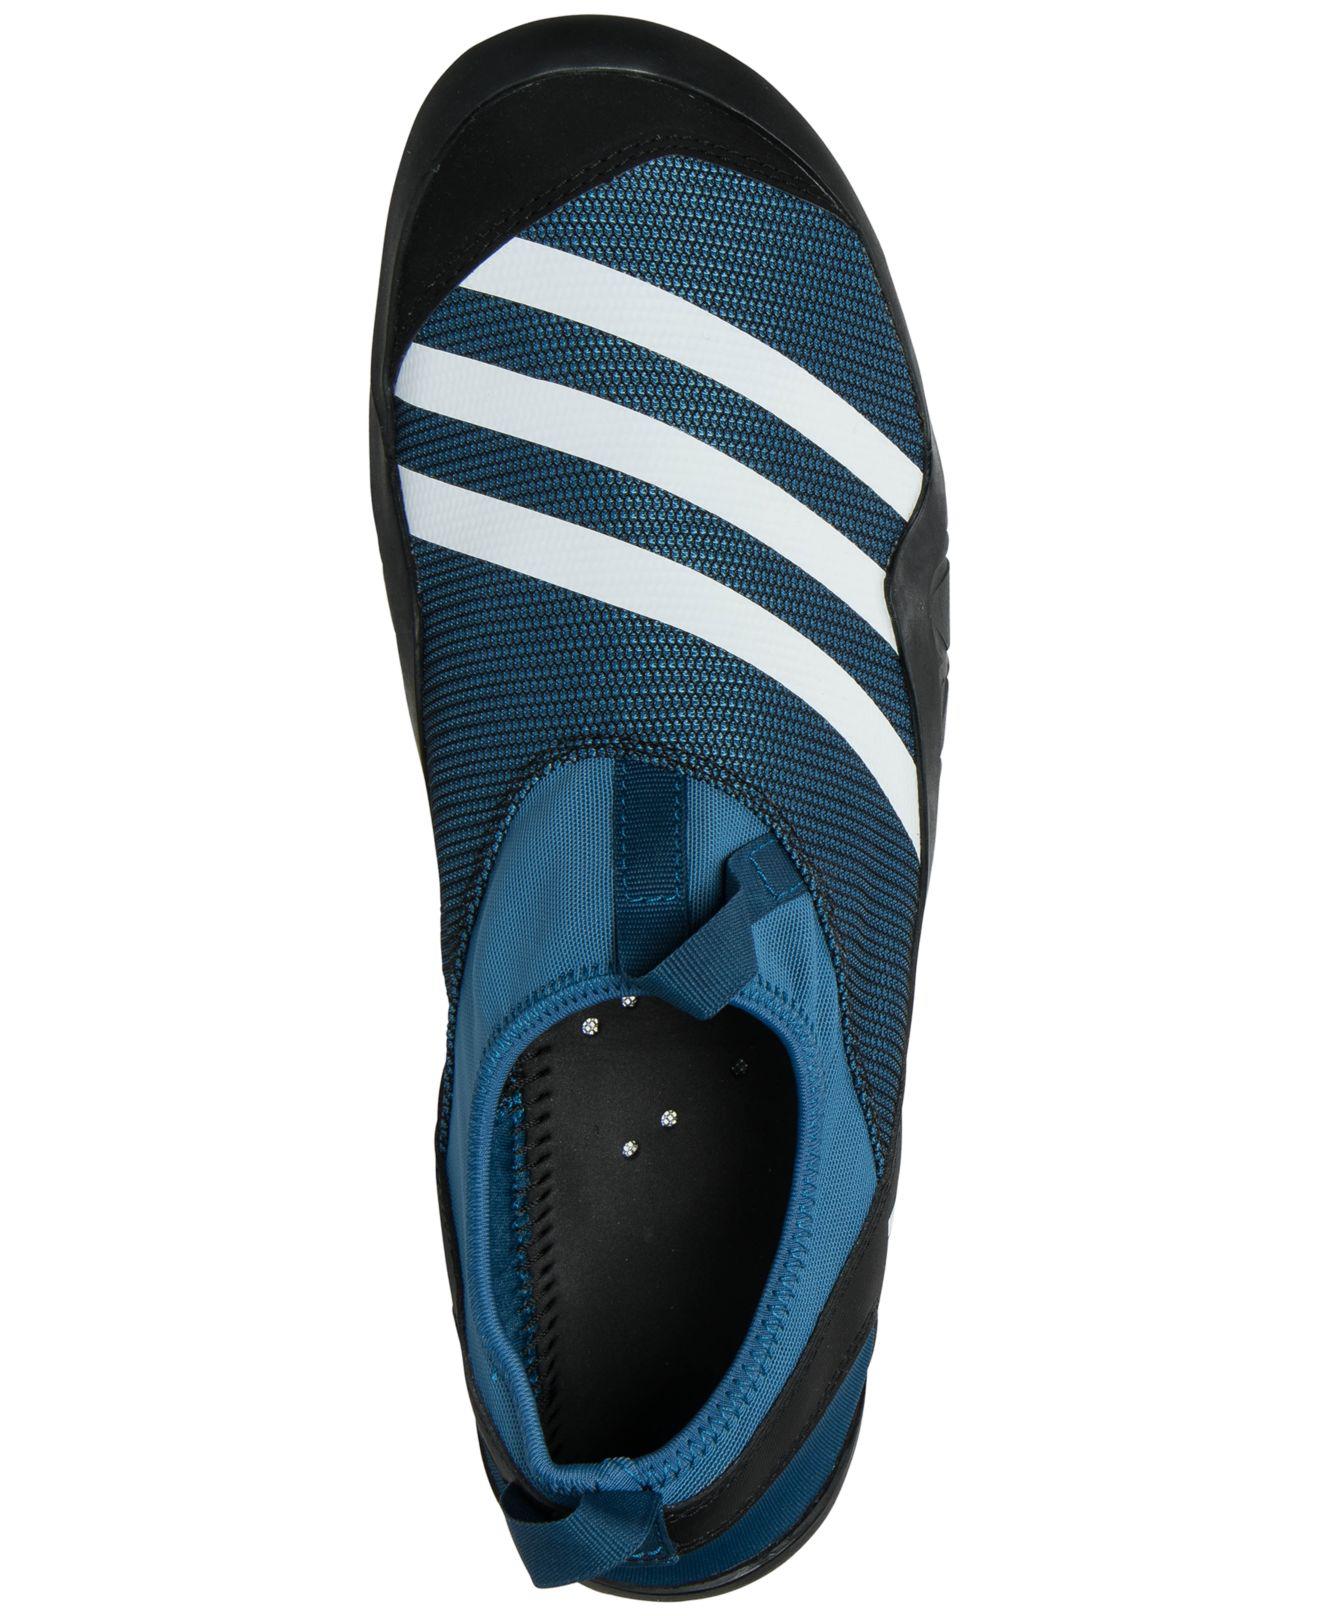 adidas Originals Synthetic Climacool Jawpaw Slip-on in Blue for Men - Lyst